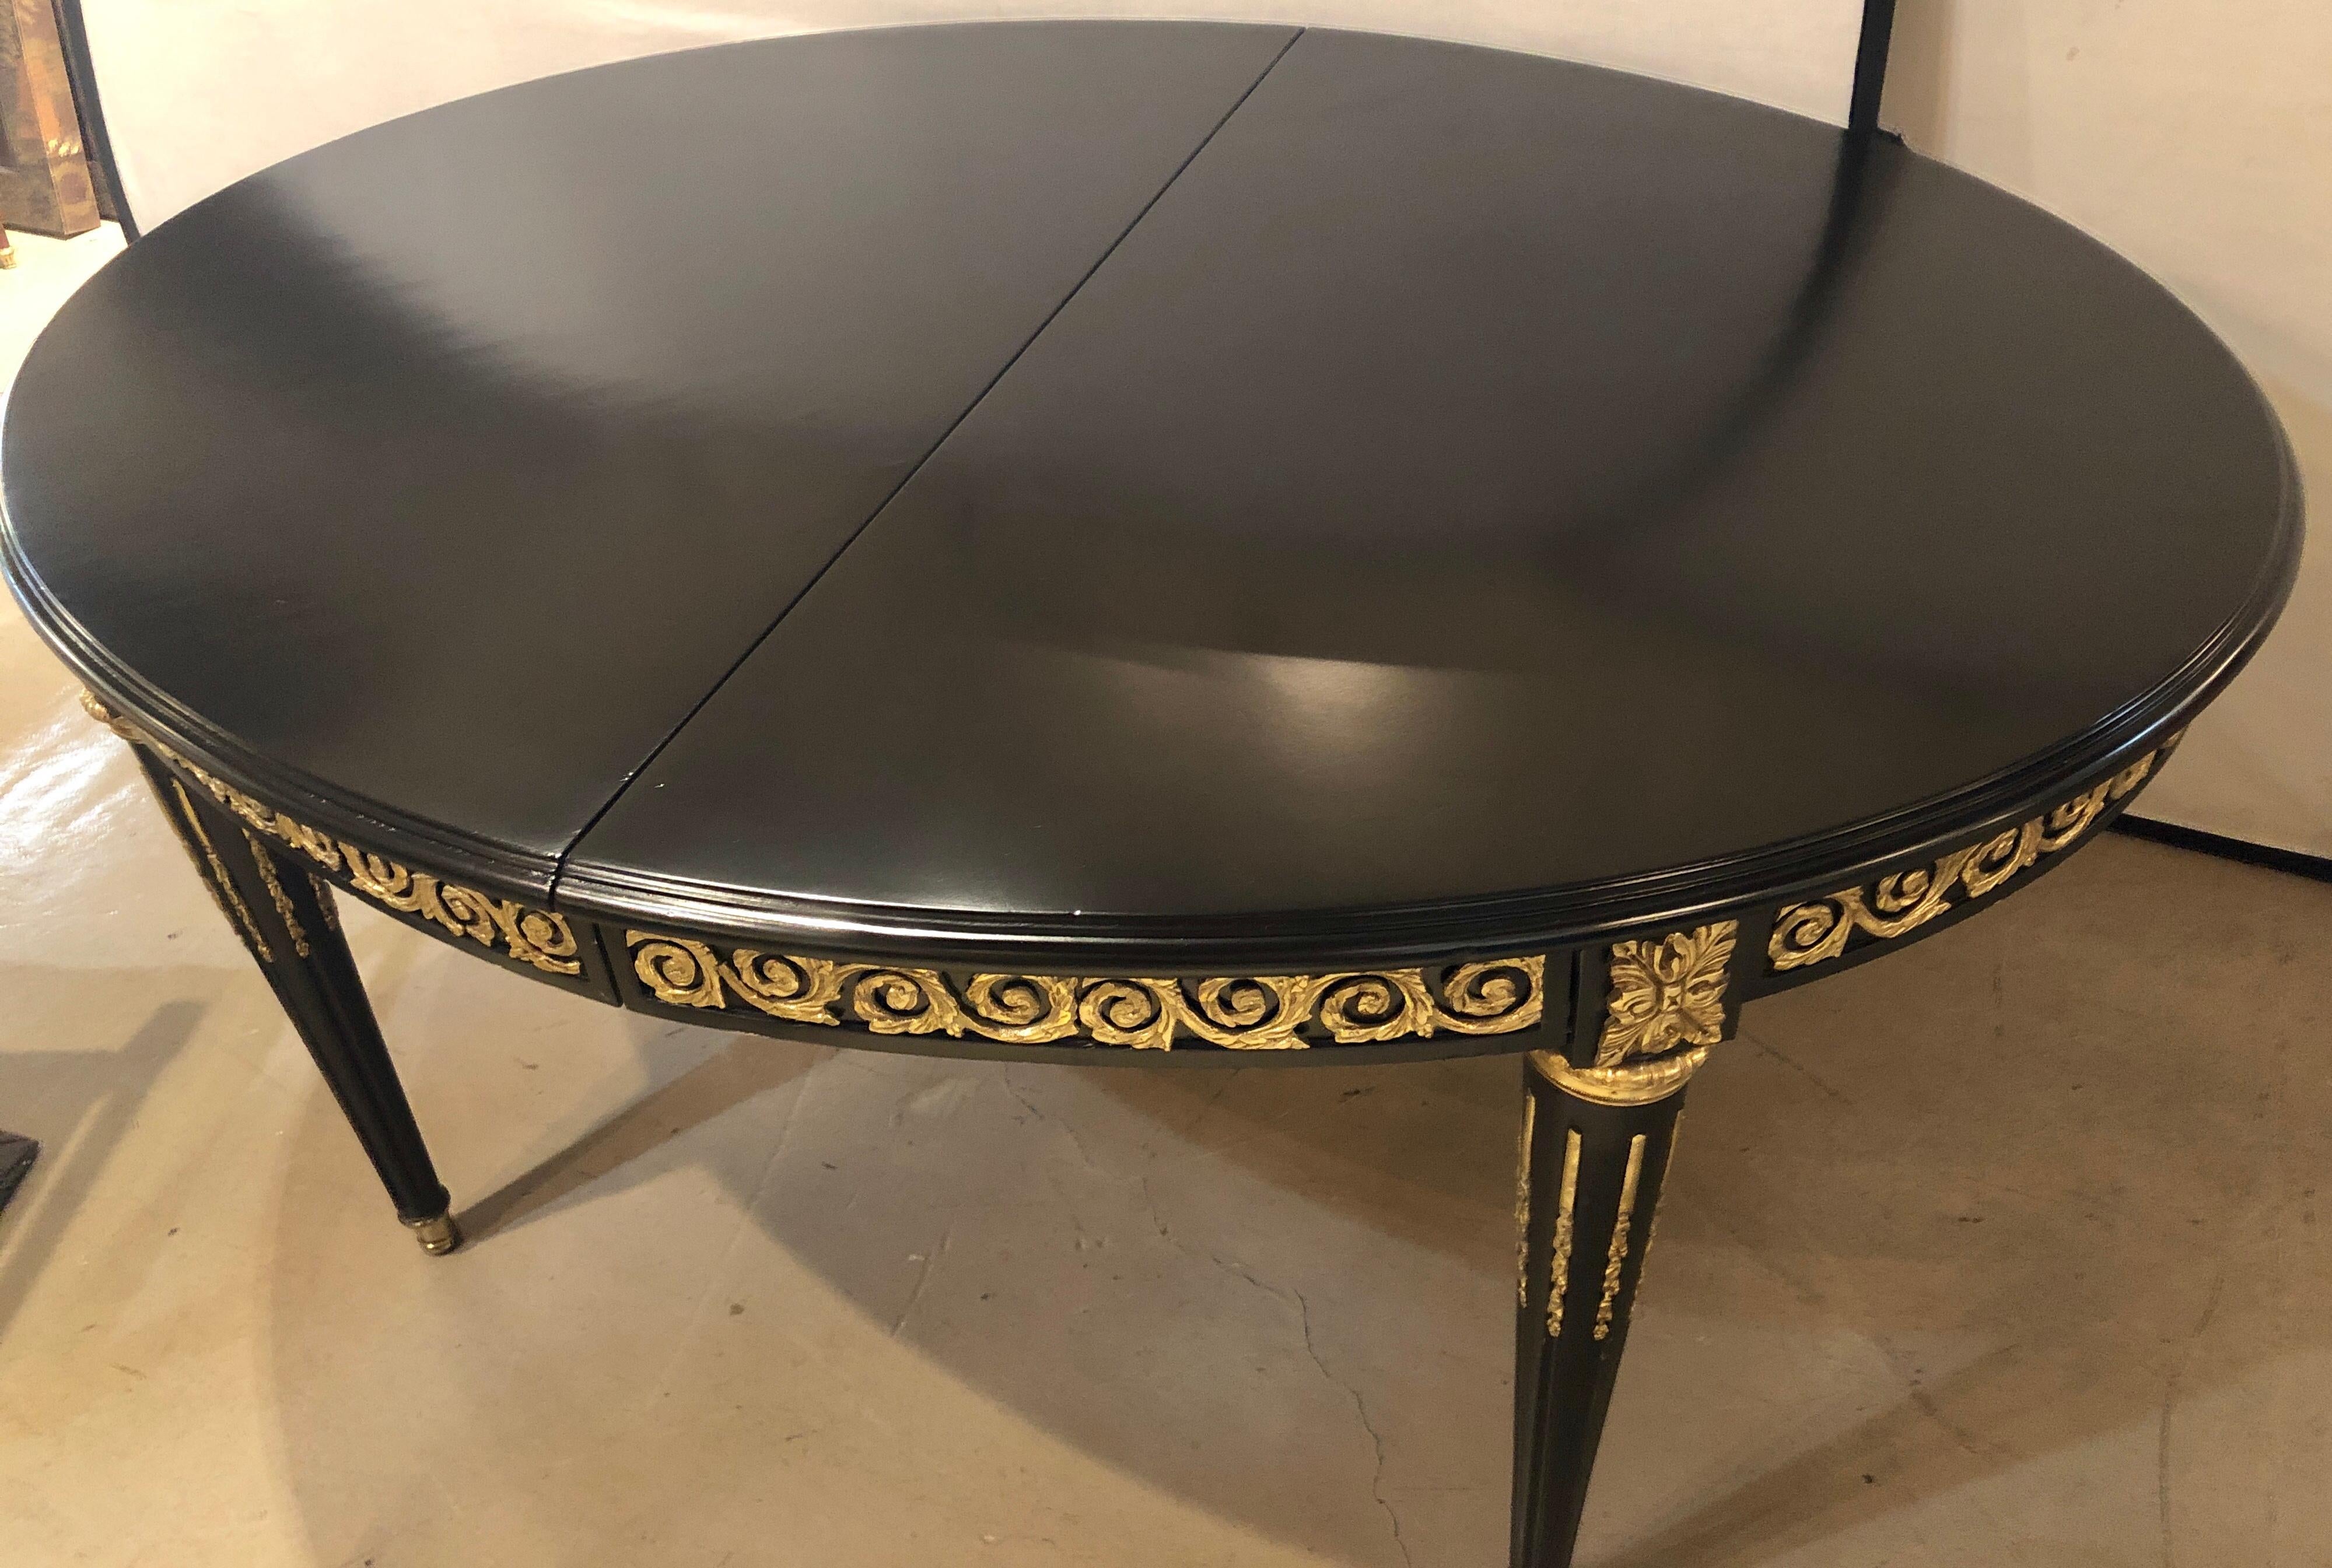 20th Century Louis XVI Style Ebony Bronze Mounted Dining Table with 1 Leaf